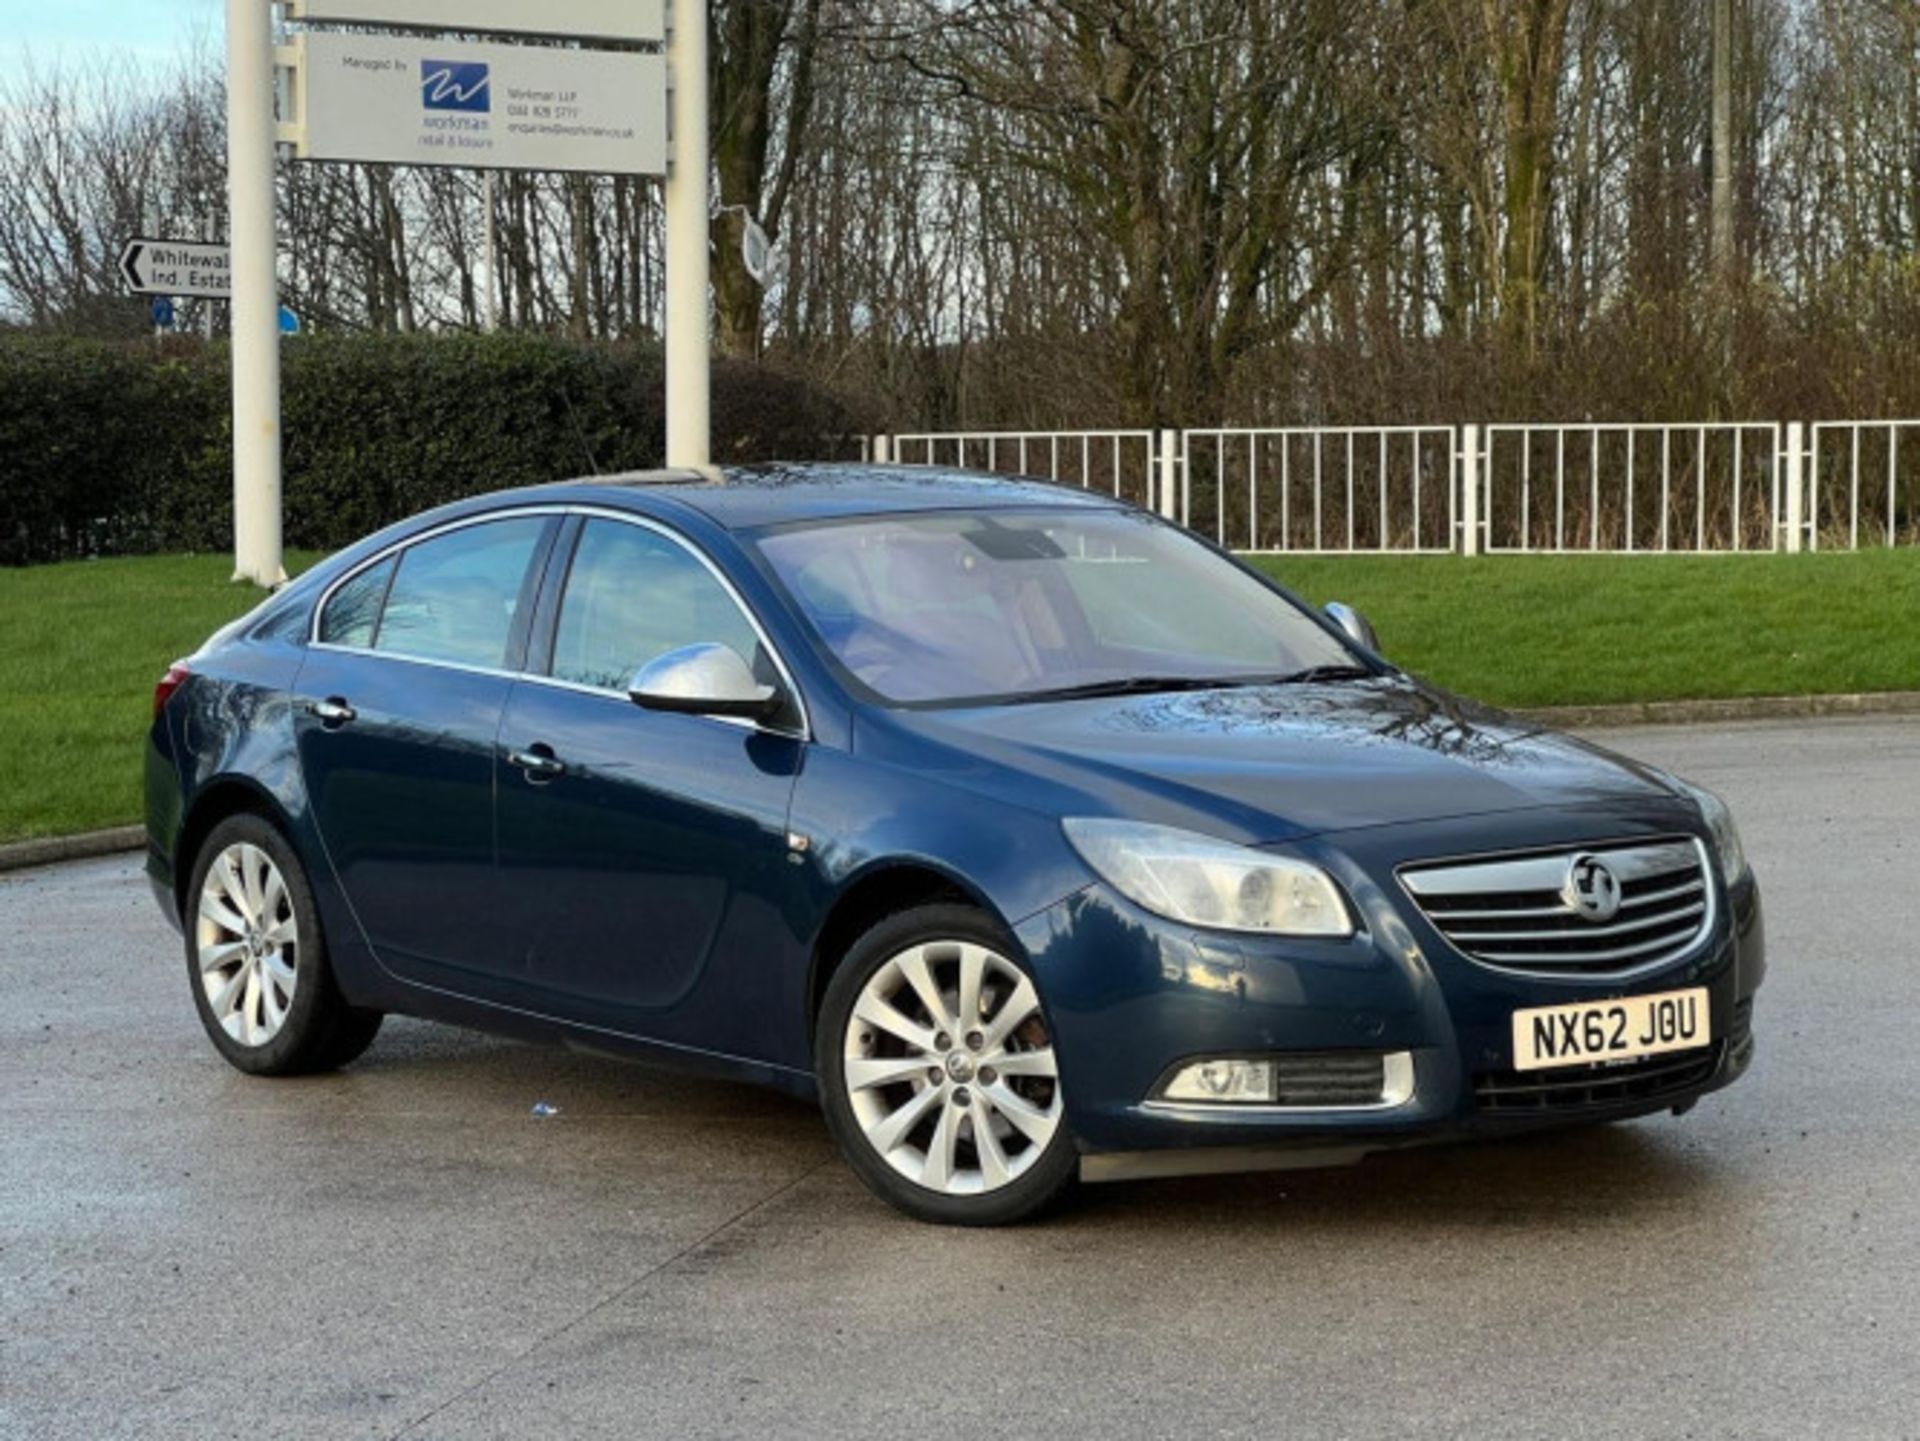 2012 VAUXHALL INSIGNIA 2.0 CDTI ELITE AUTO EURO 5 - DISCOVER EXCELLENCE >>--NO VAT ON HAMMER--<< - Image 118 of 120